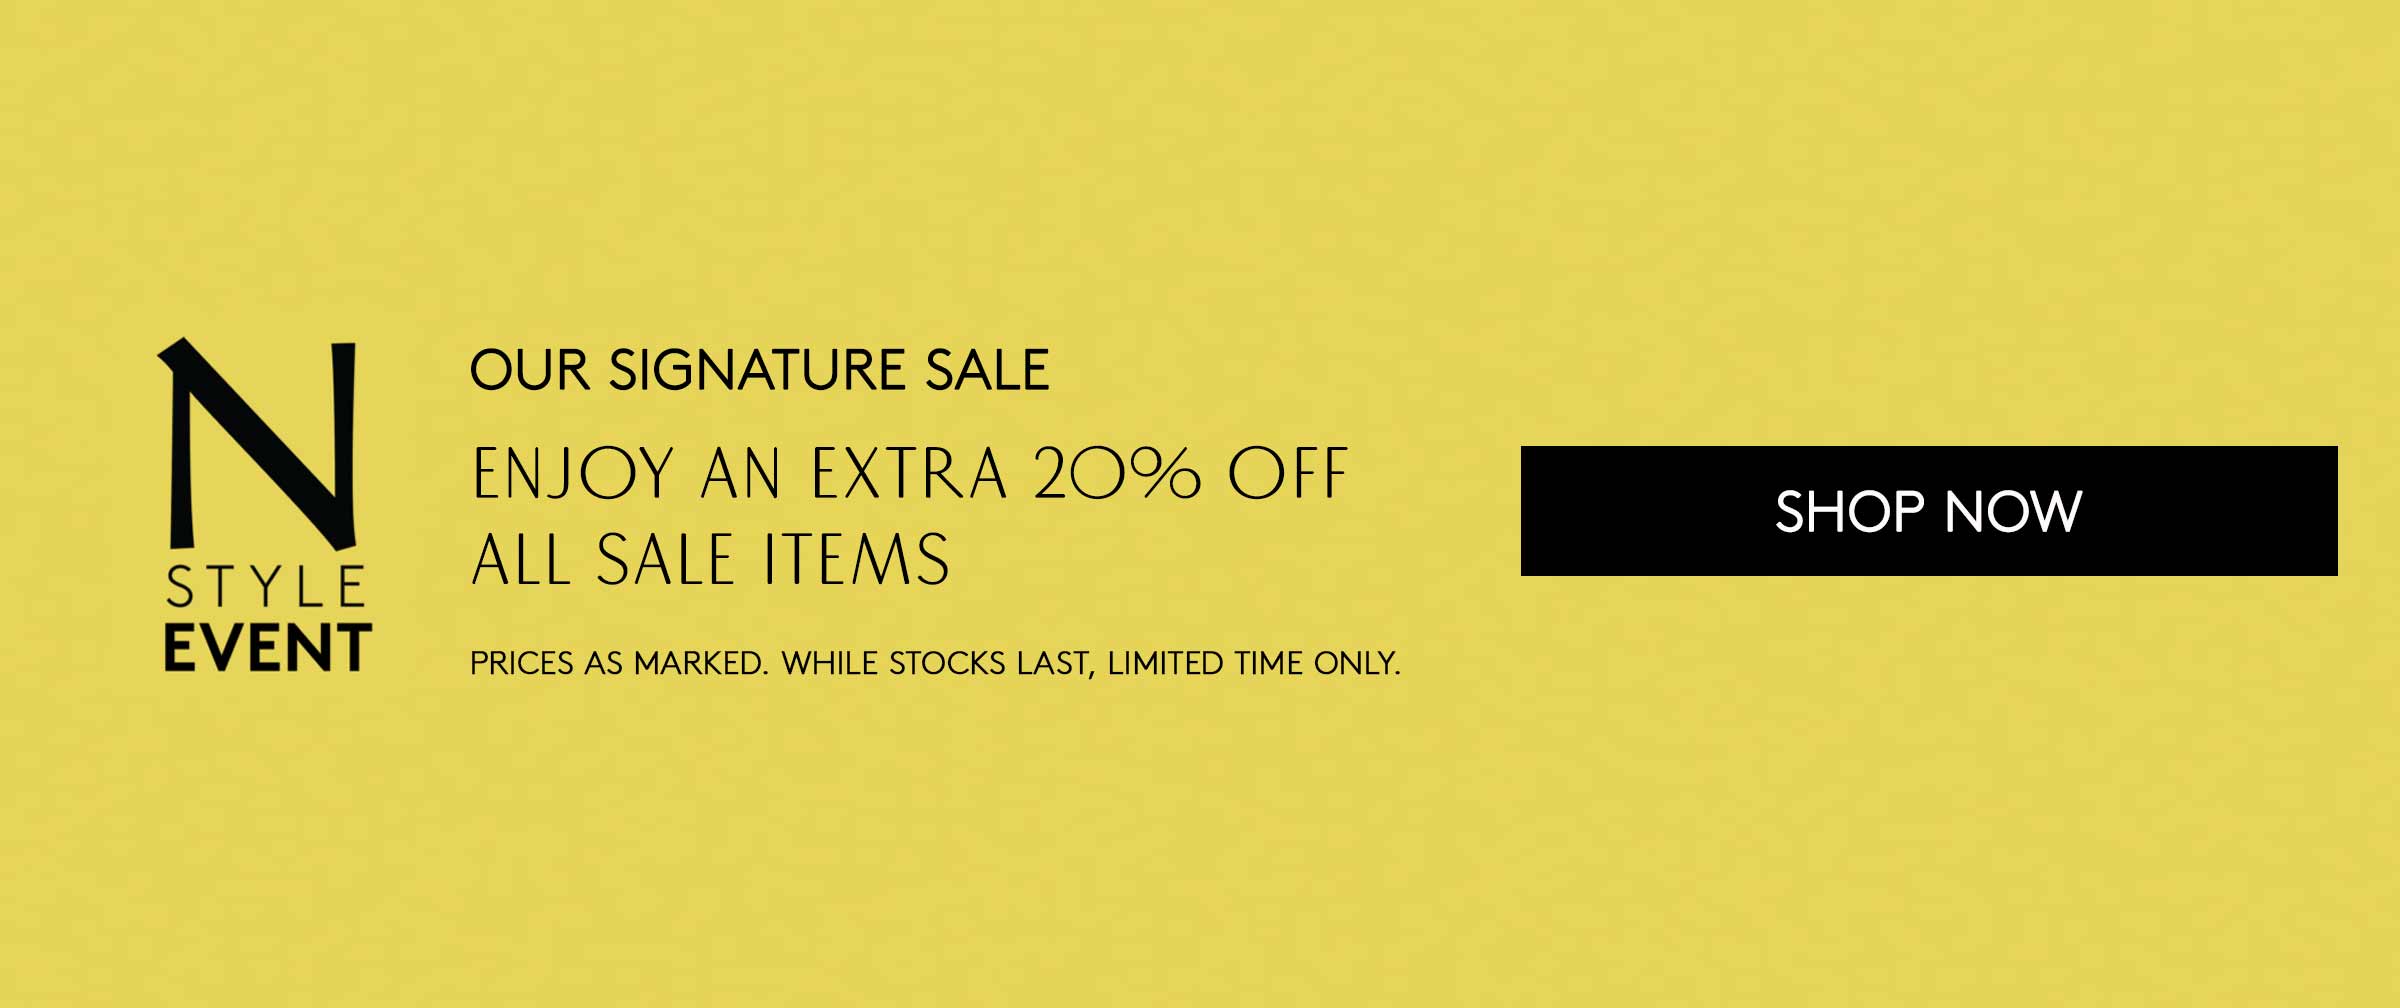 OUR SIGNATURE SALE - Enjoy an Extra 20% Off All Sale Items